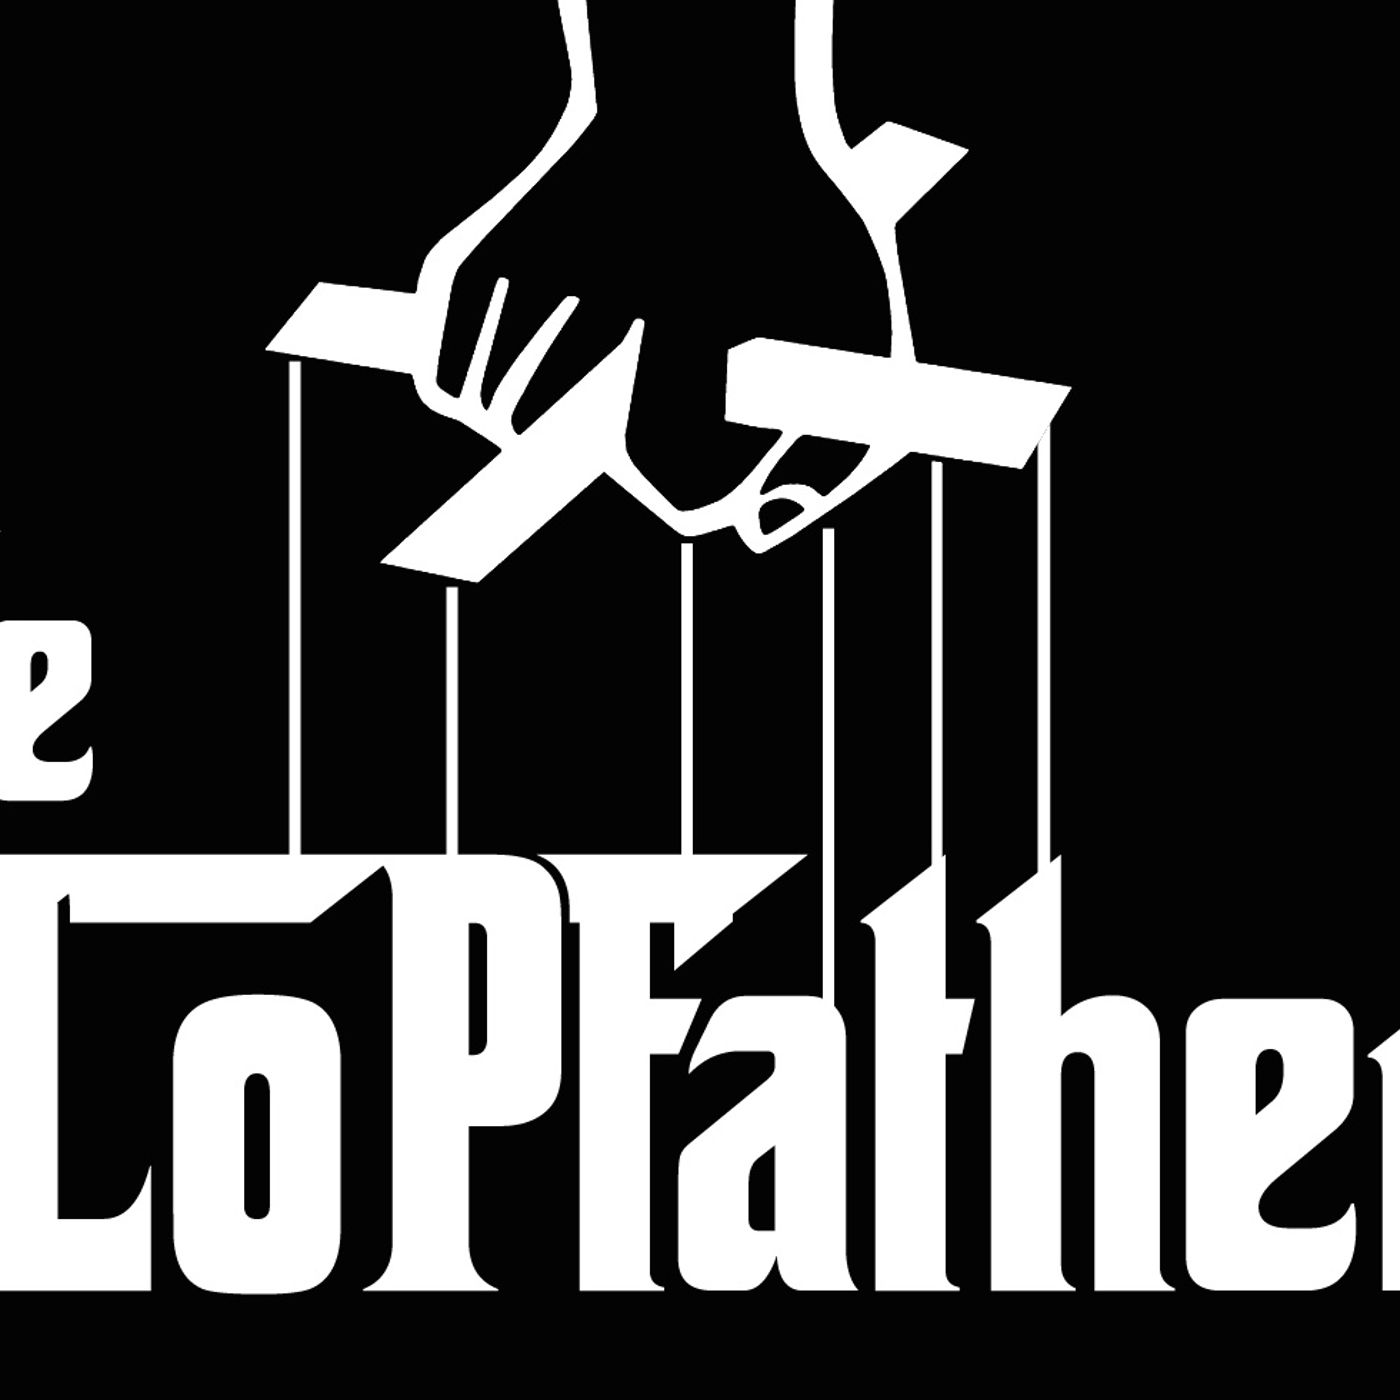 The GLoPfathers